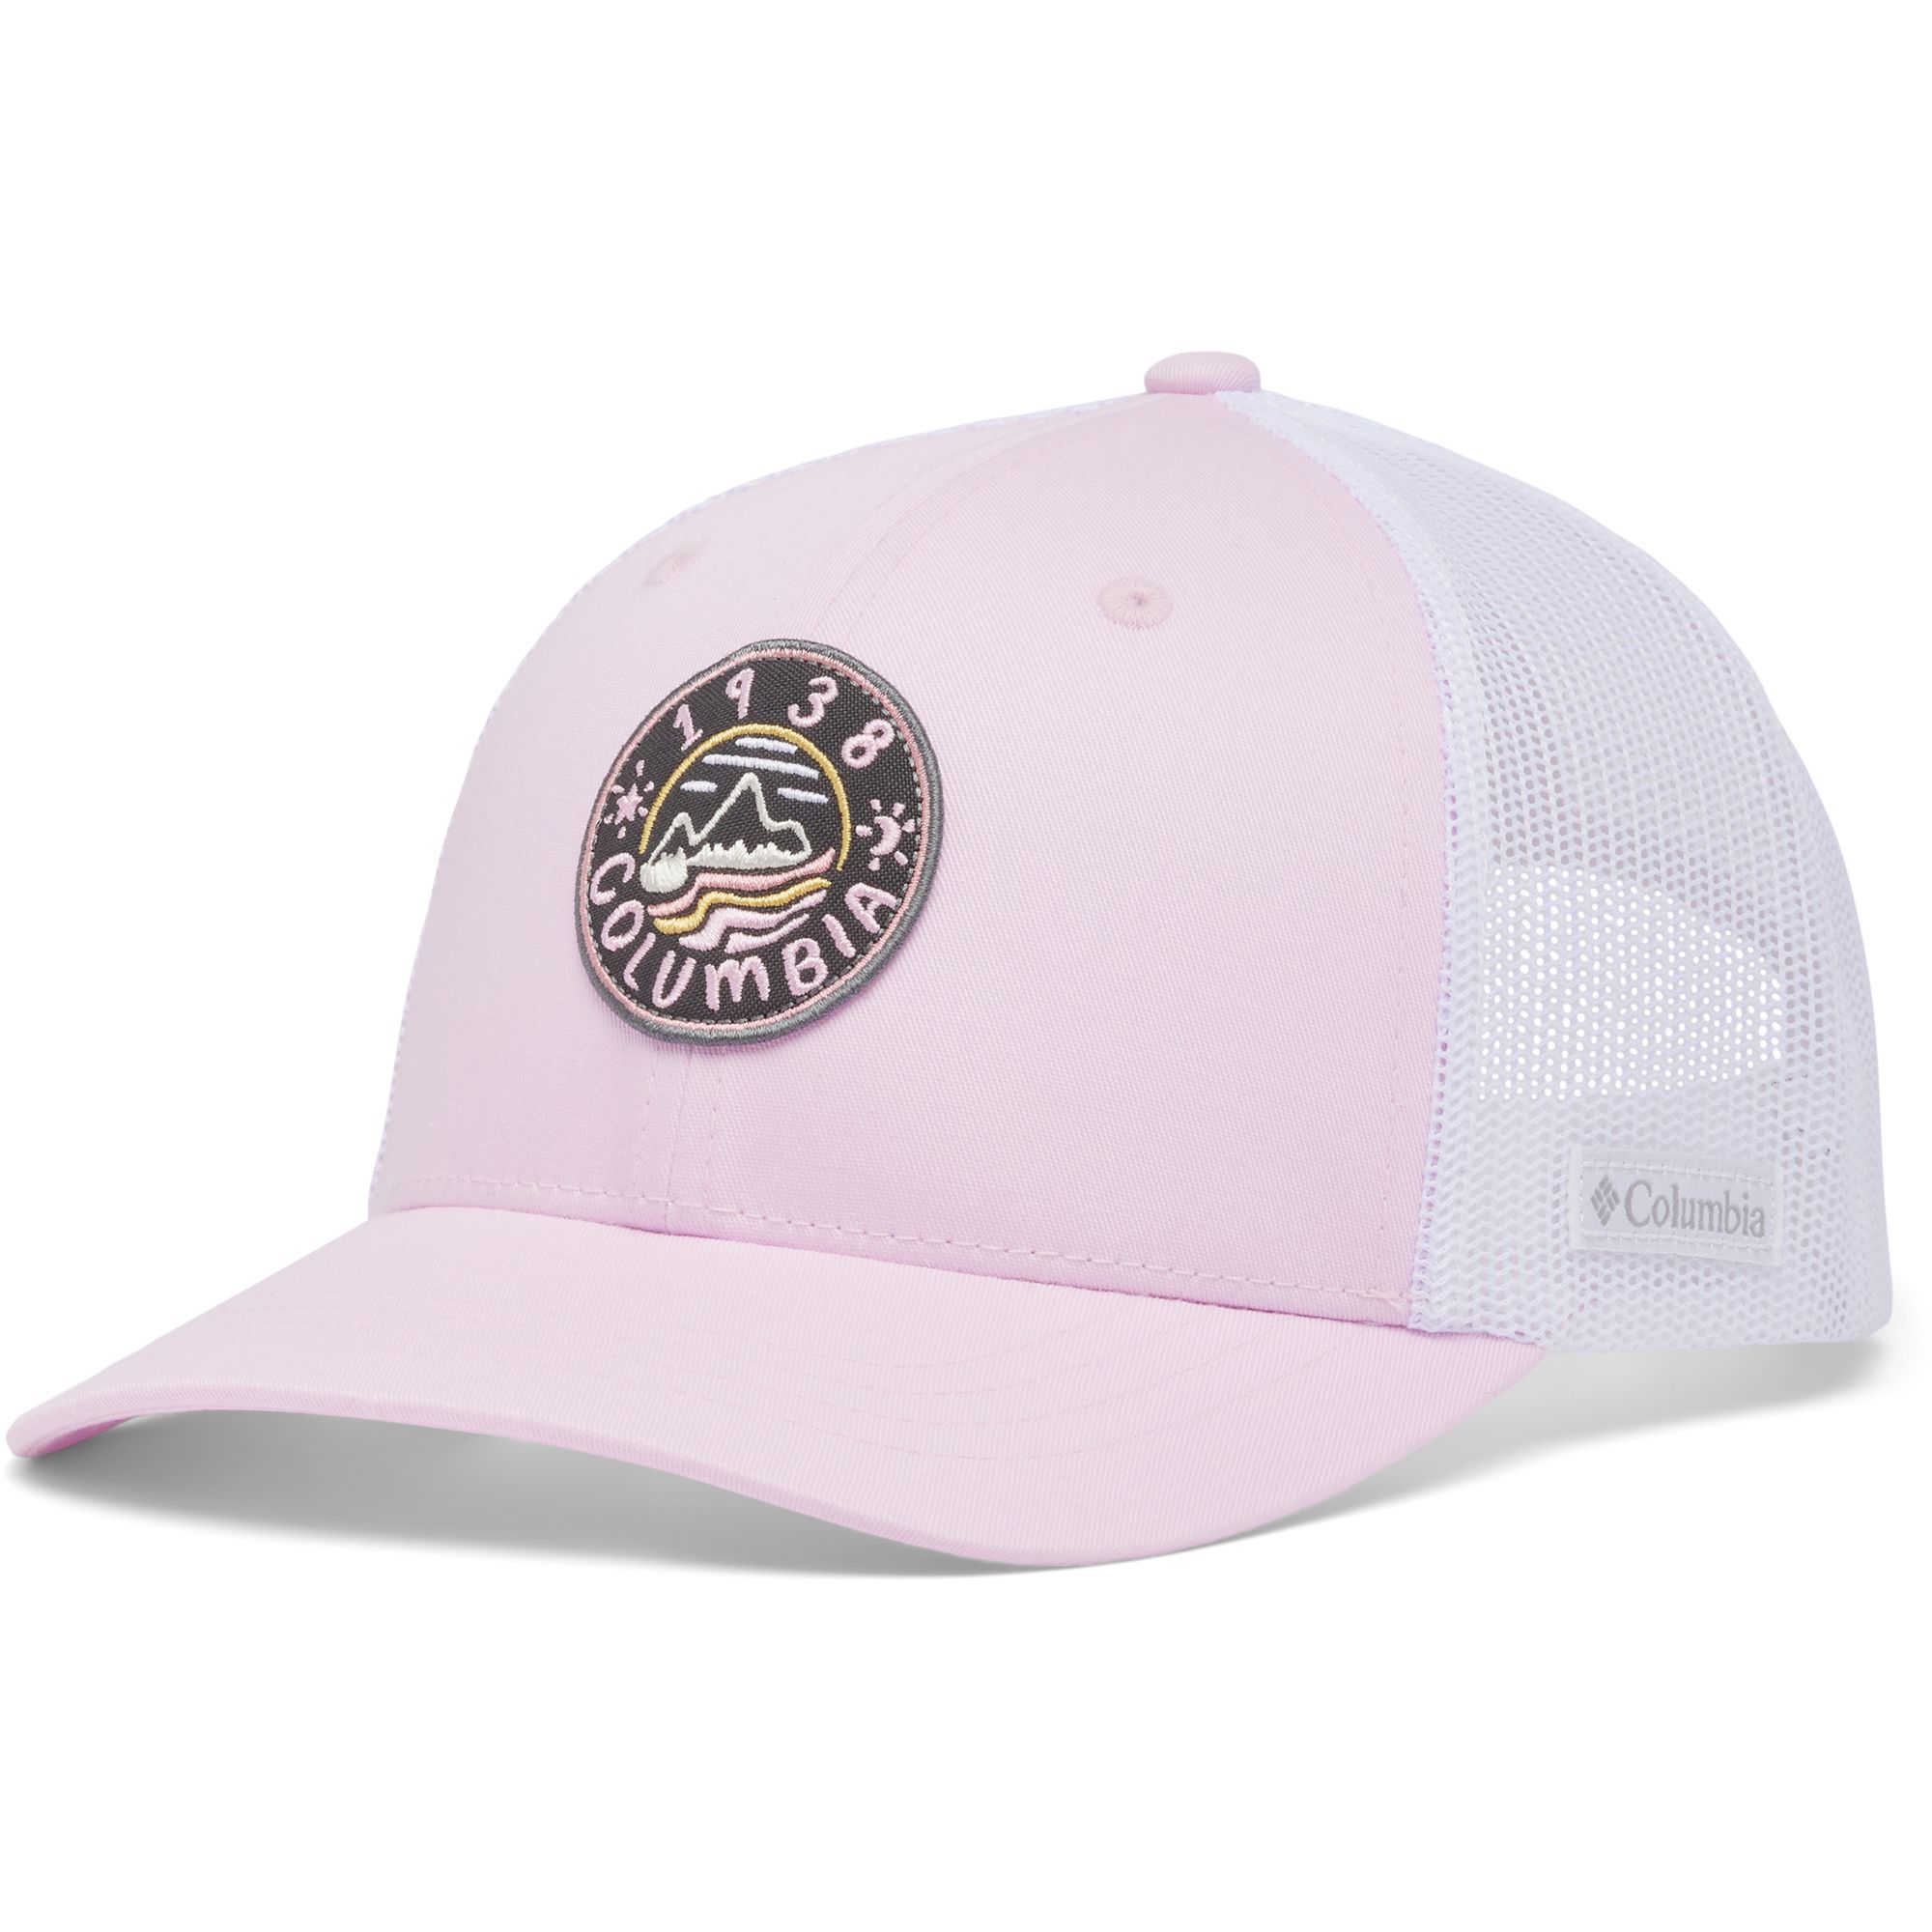 Columbia Youth Snap Back